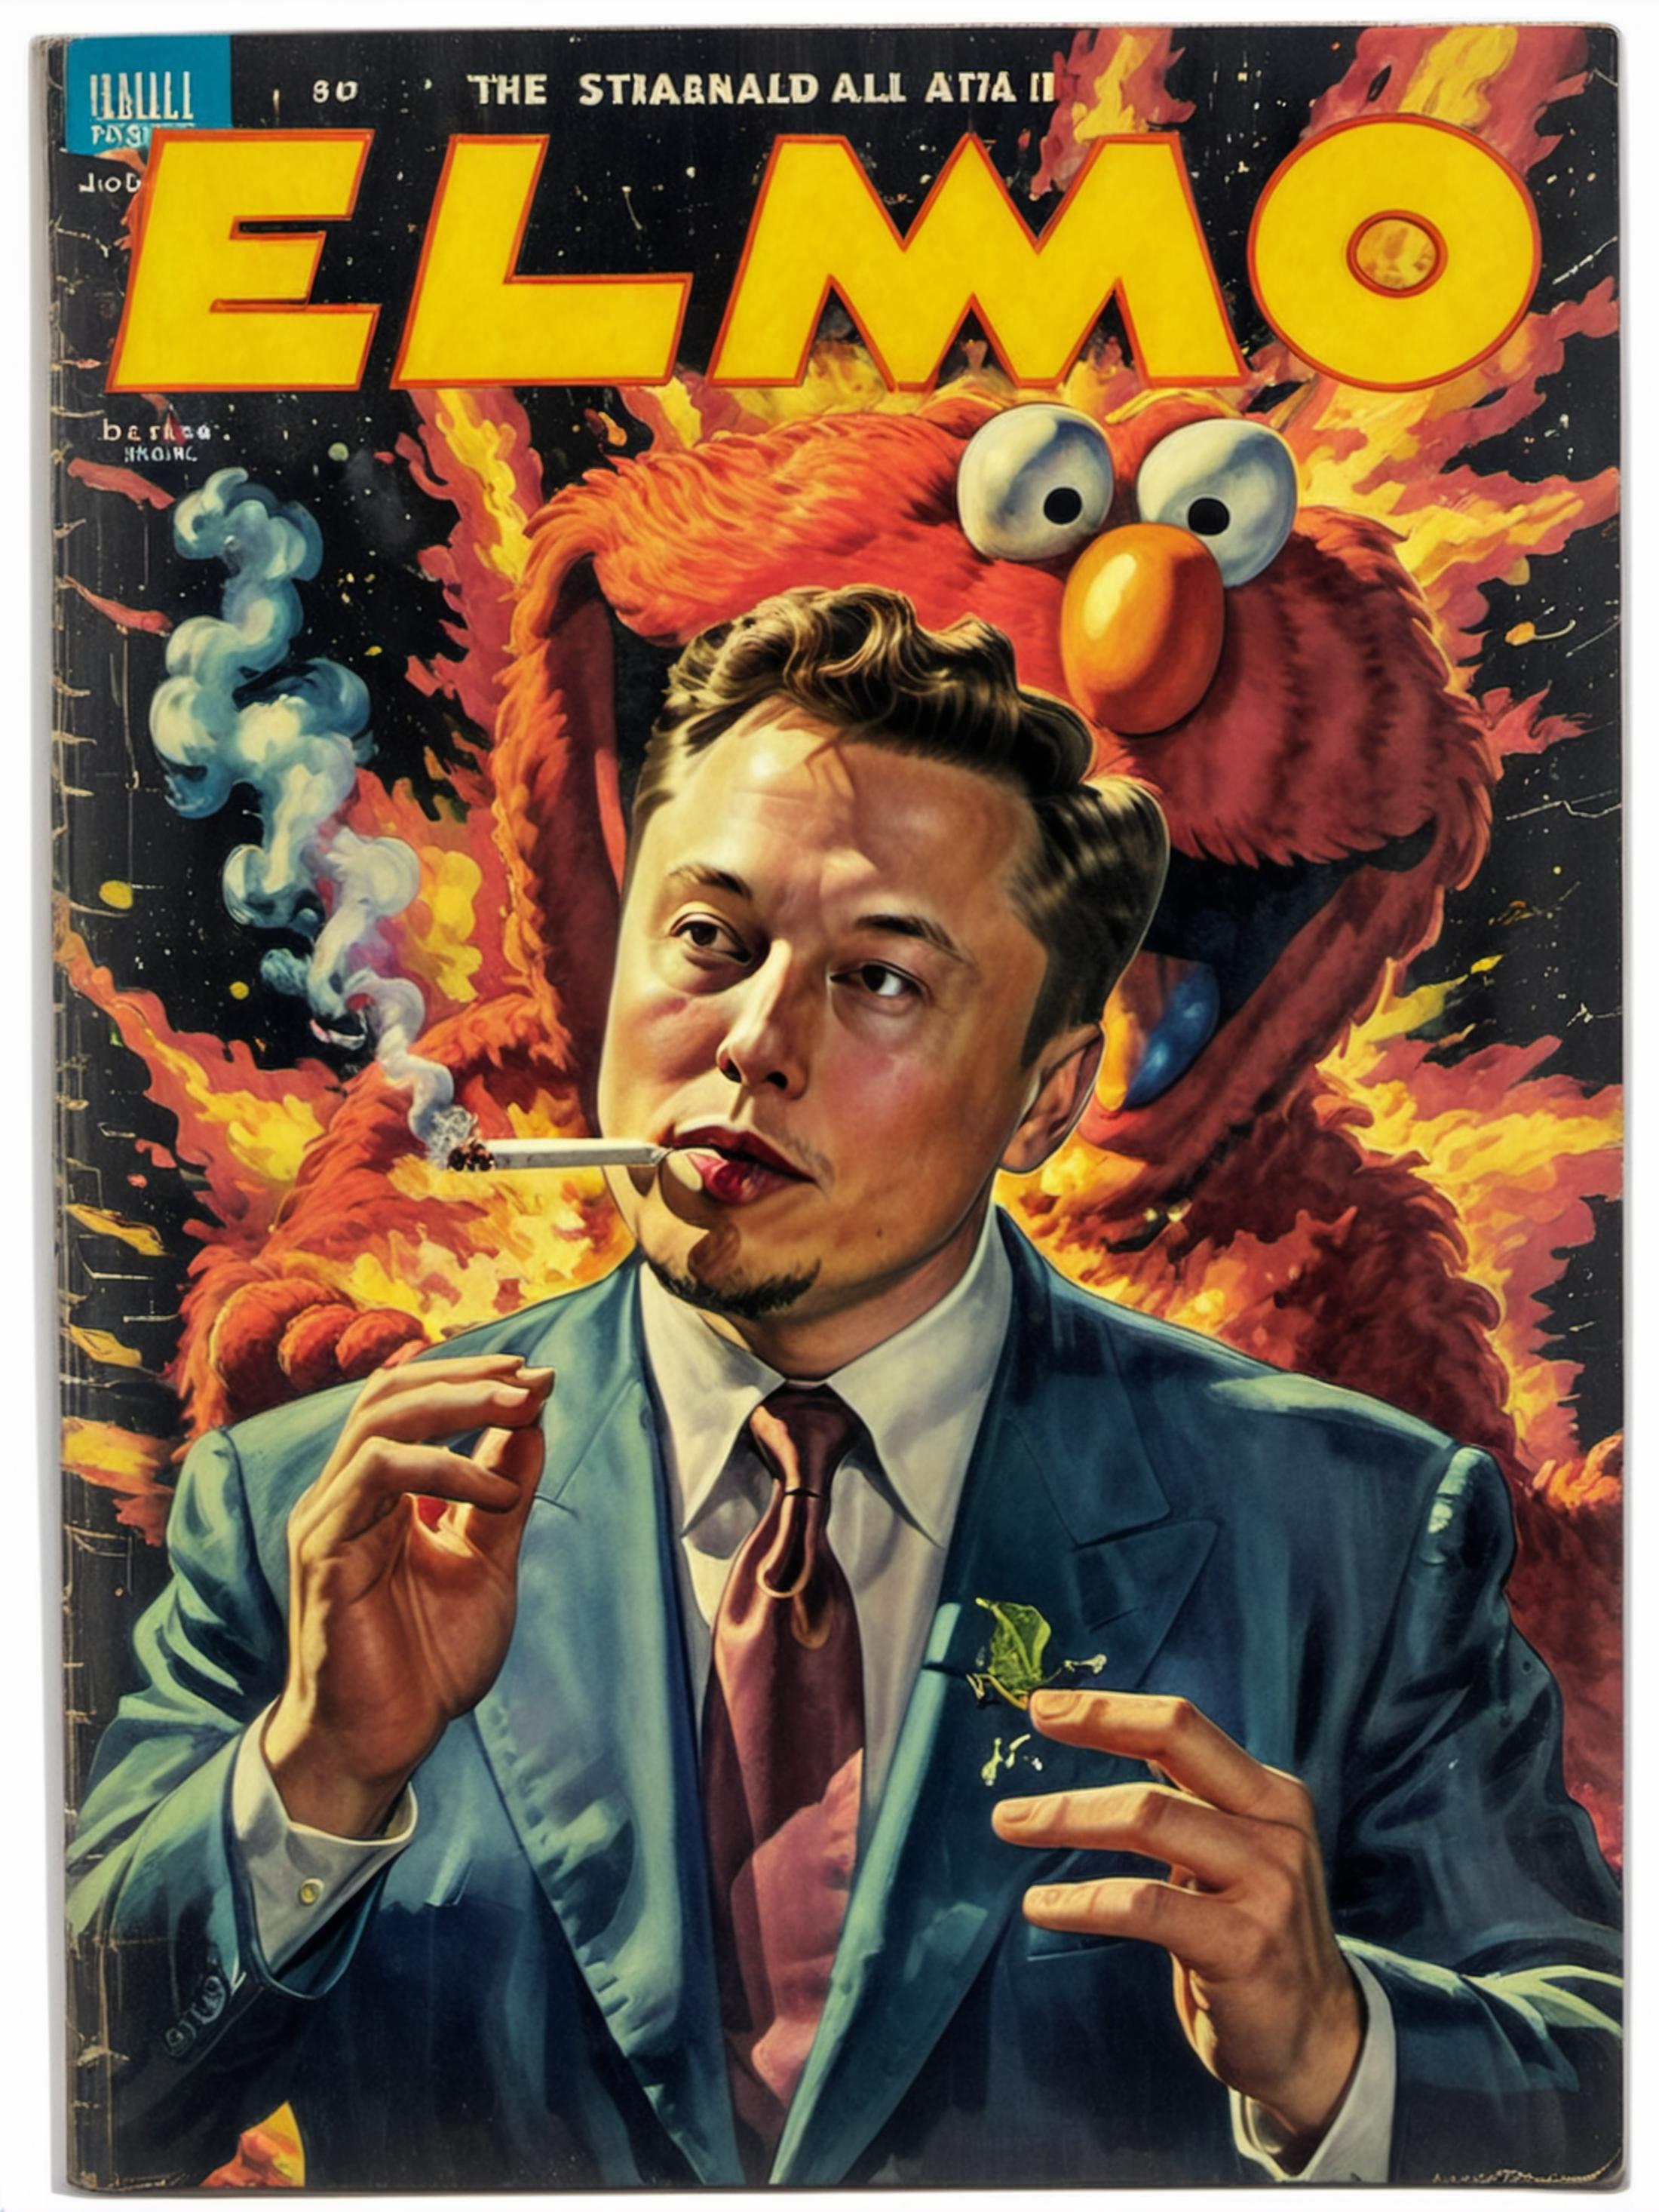 A comic book cover featuring a man smoking a cigarette with Elmo from Sesame Street behind him.